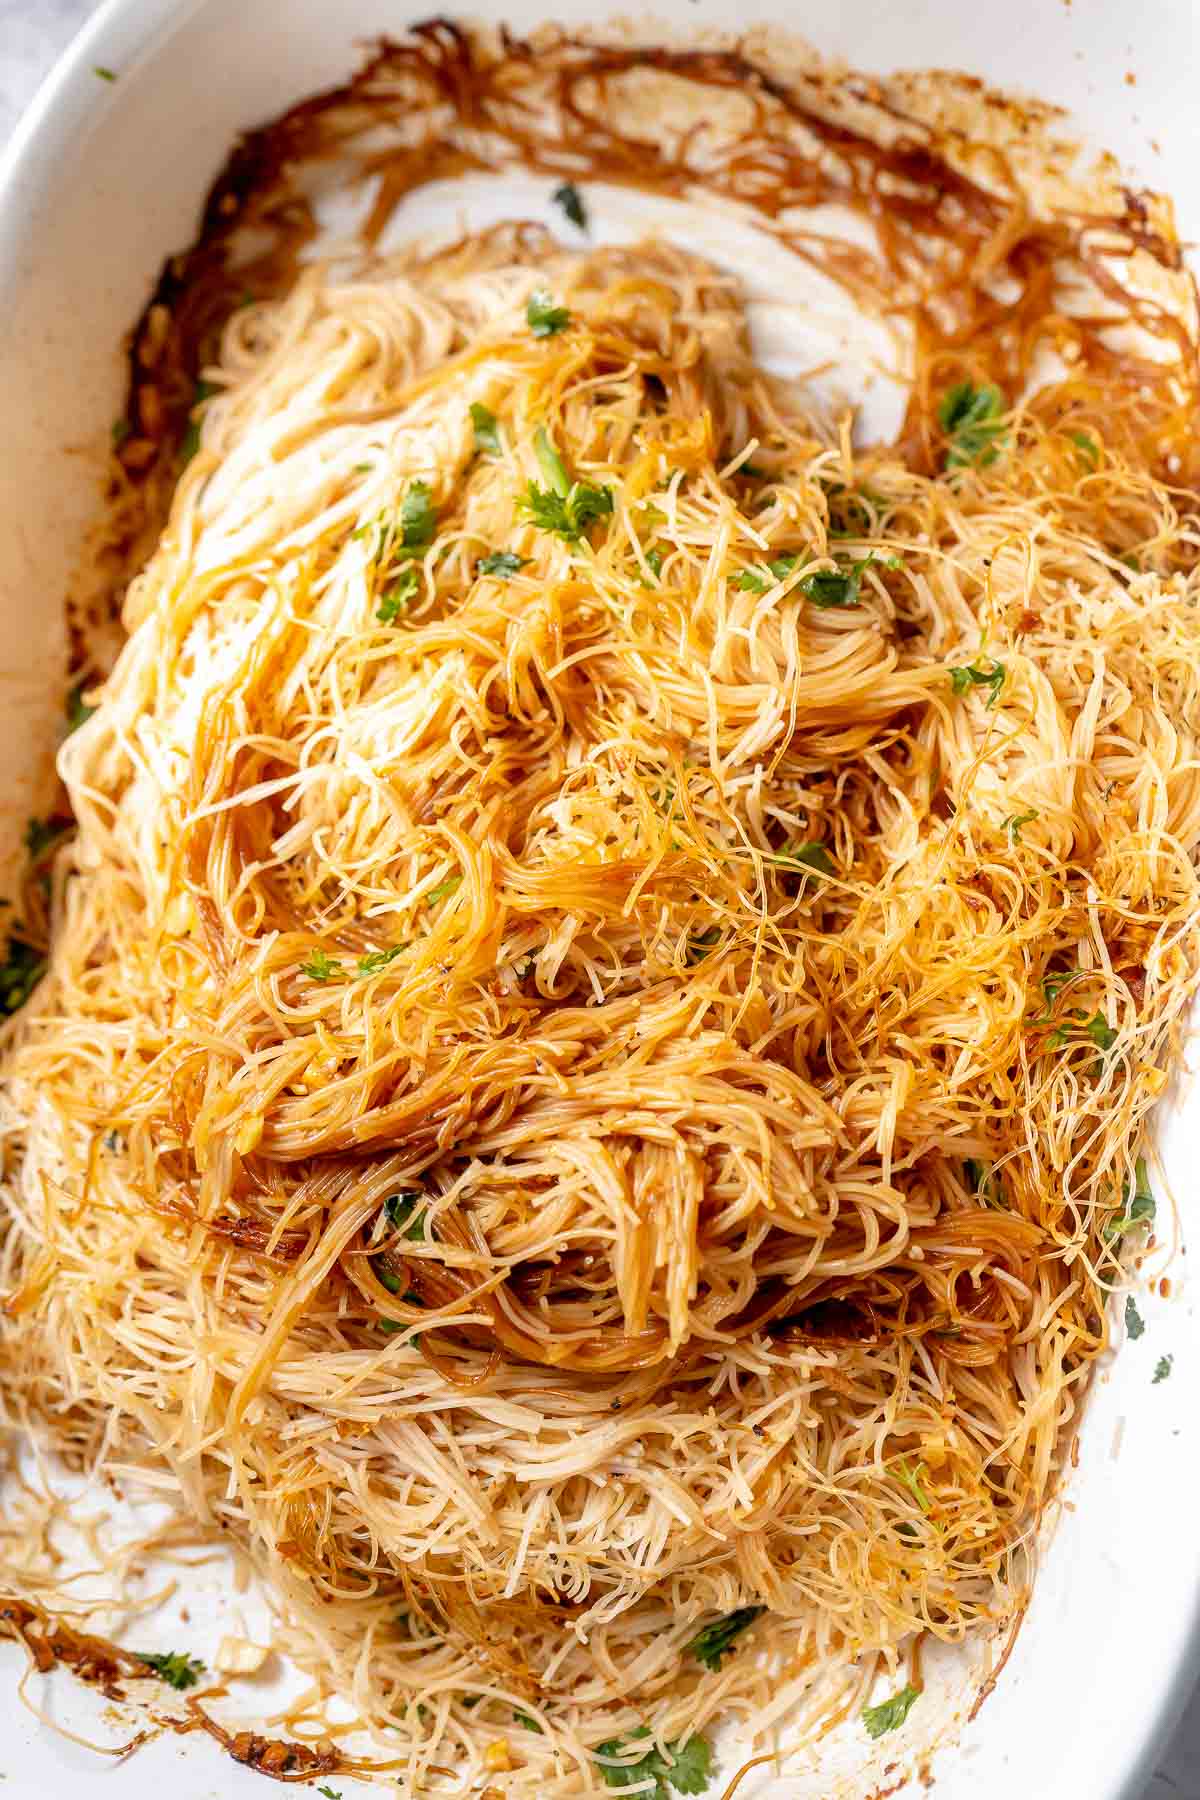 A bundle of cooked brown noodles in a large white ceramic baking dish.